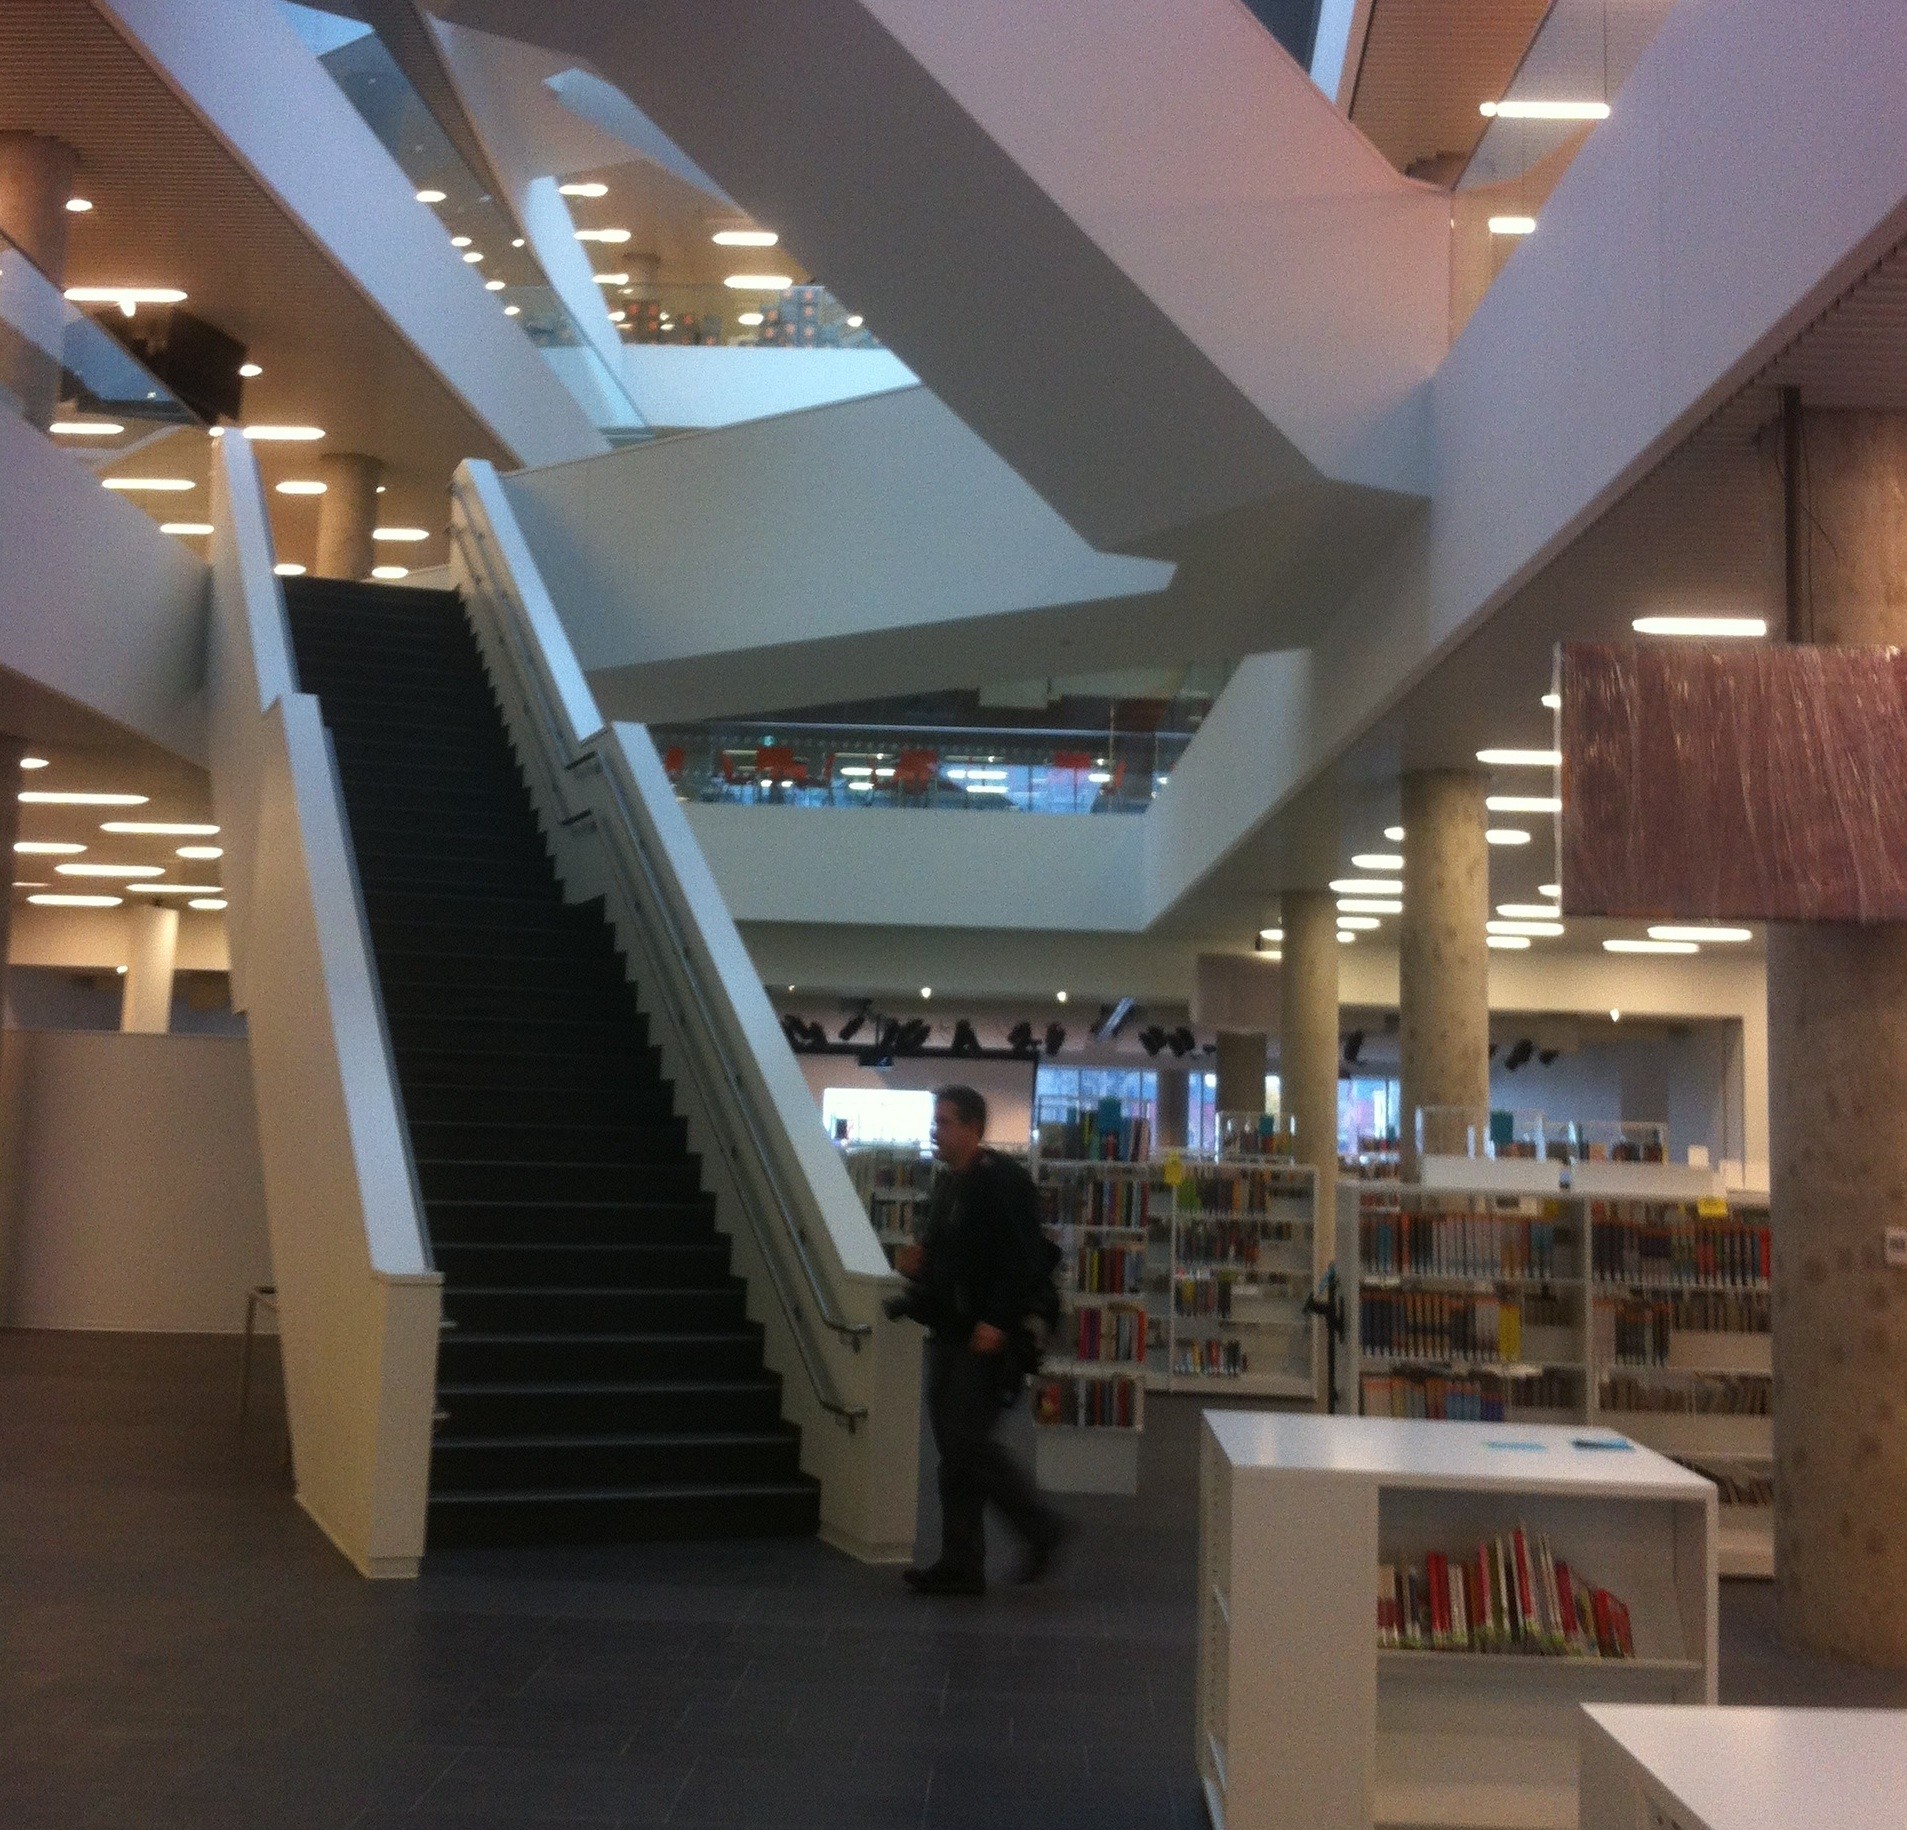 Inside the new library